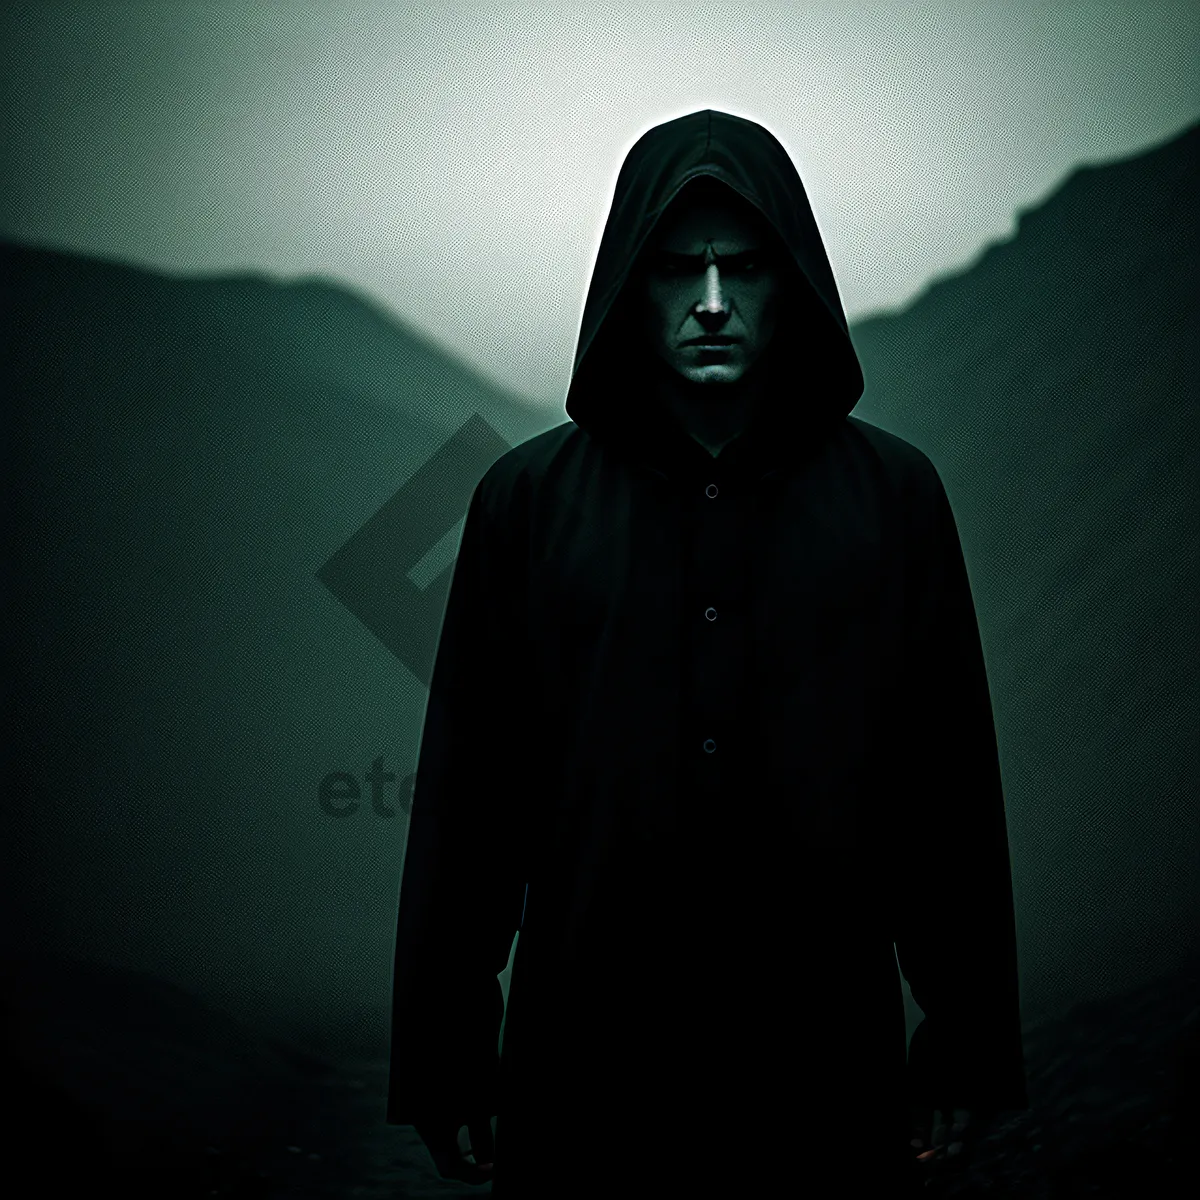 Picture of Black Robed Man with Mysterious Gaze